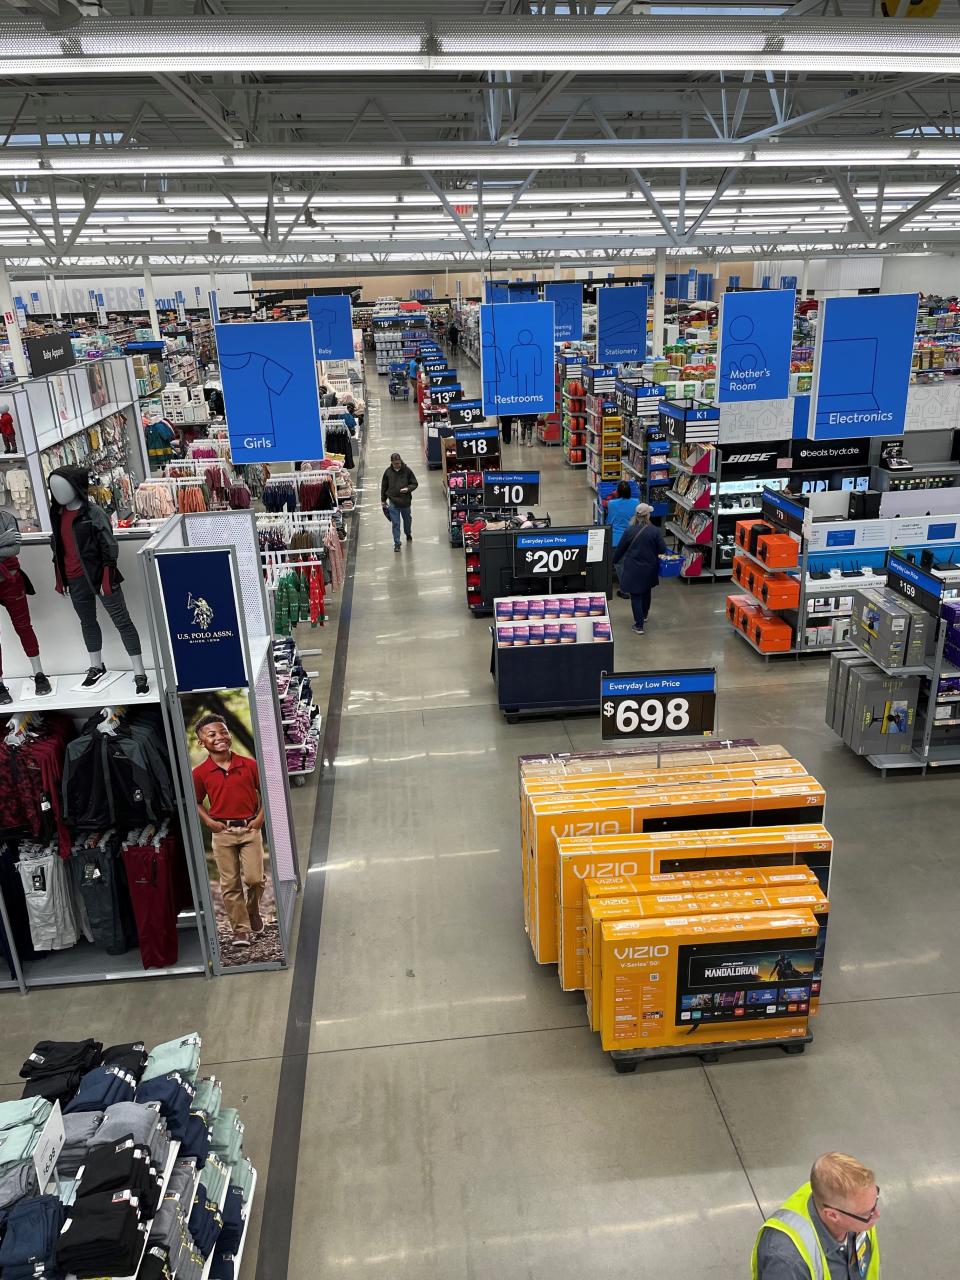 Oshkosh's Walmart underwent recent renovations that include updated signage and redesigned department layouts.